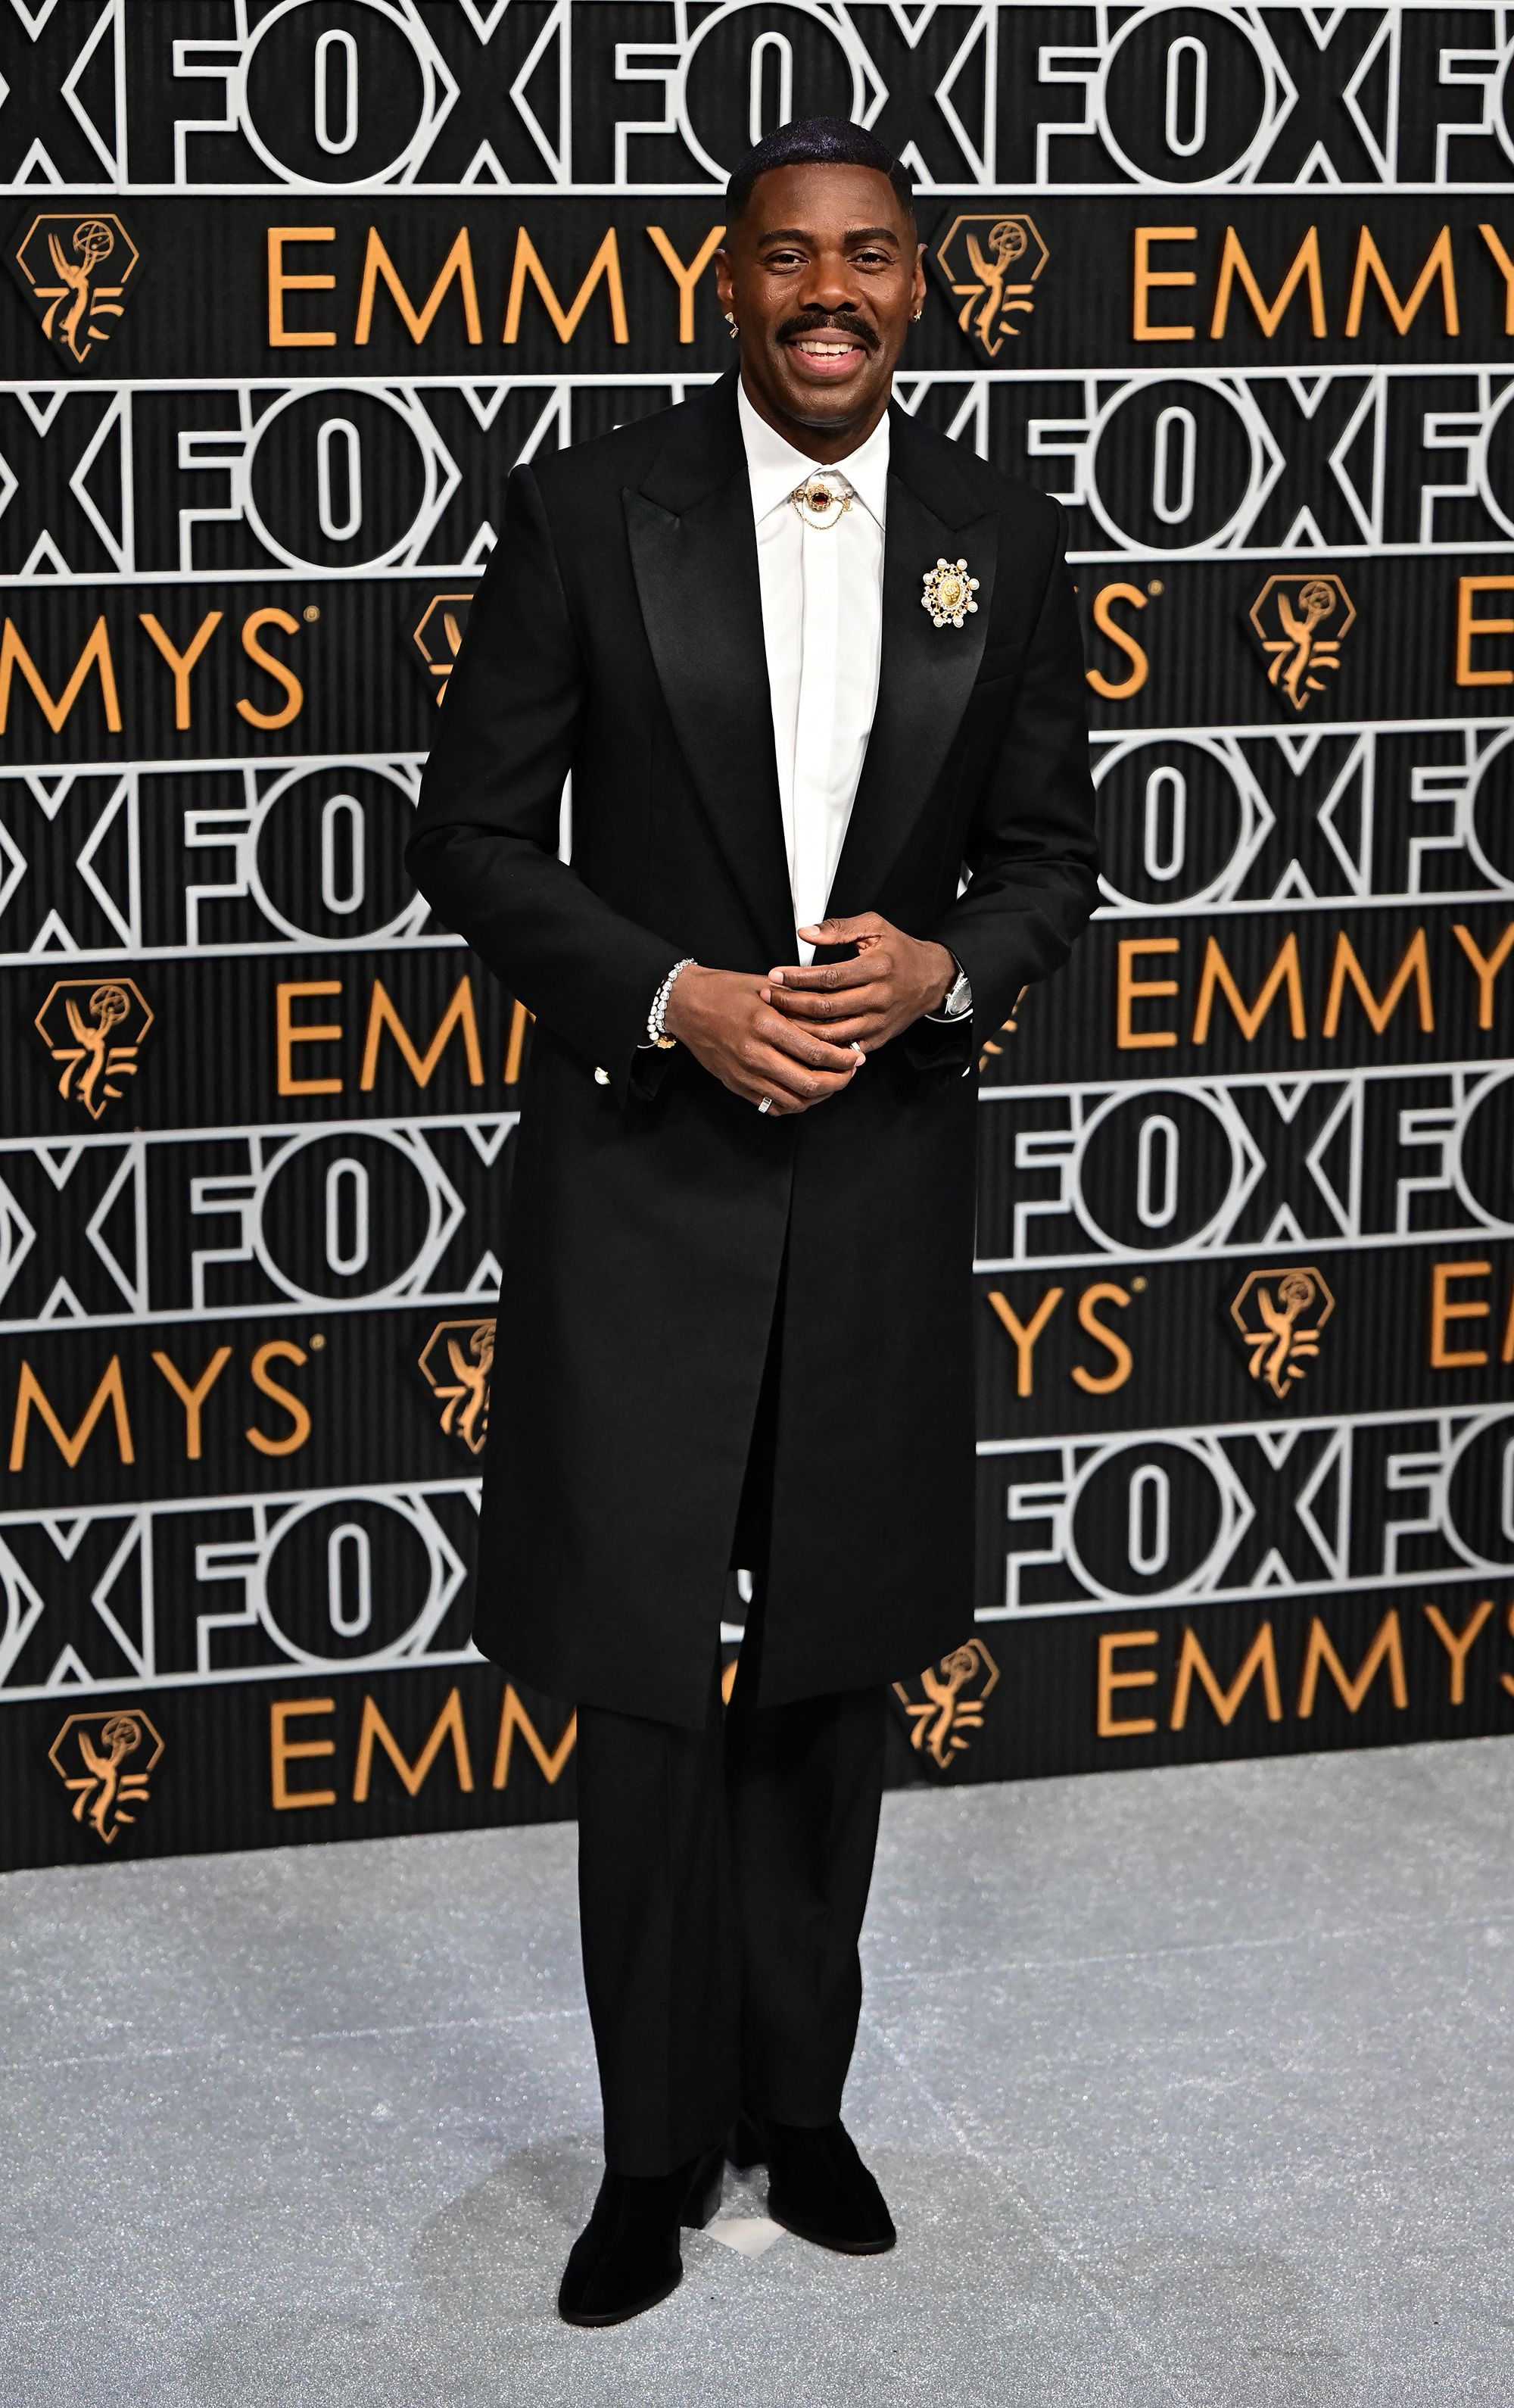 One of the standout performers on the awards season red carpet so far, “Rustin” and “The Color Purple” actor Colman Domingo, arrived in a custom Louis Vuitton suit.